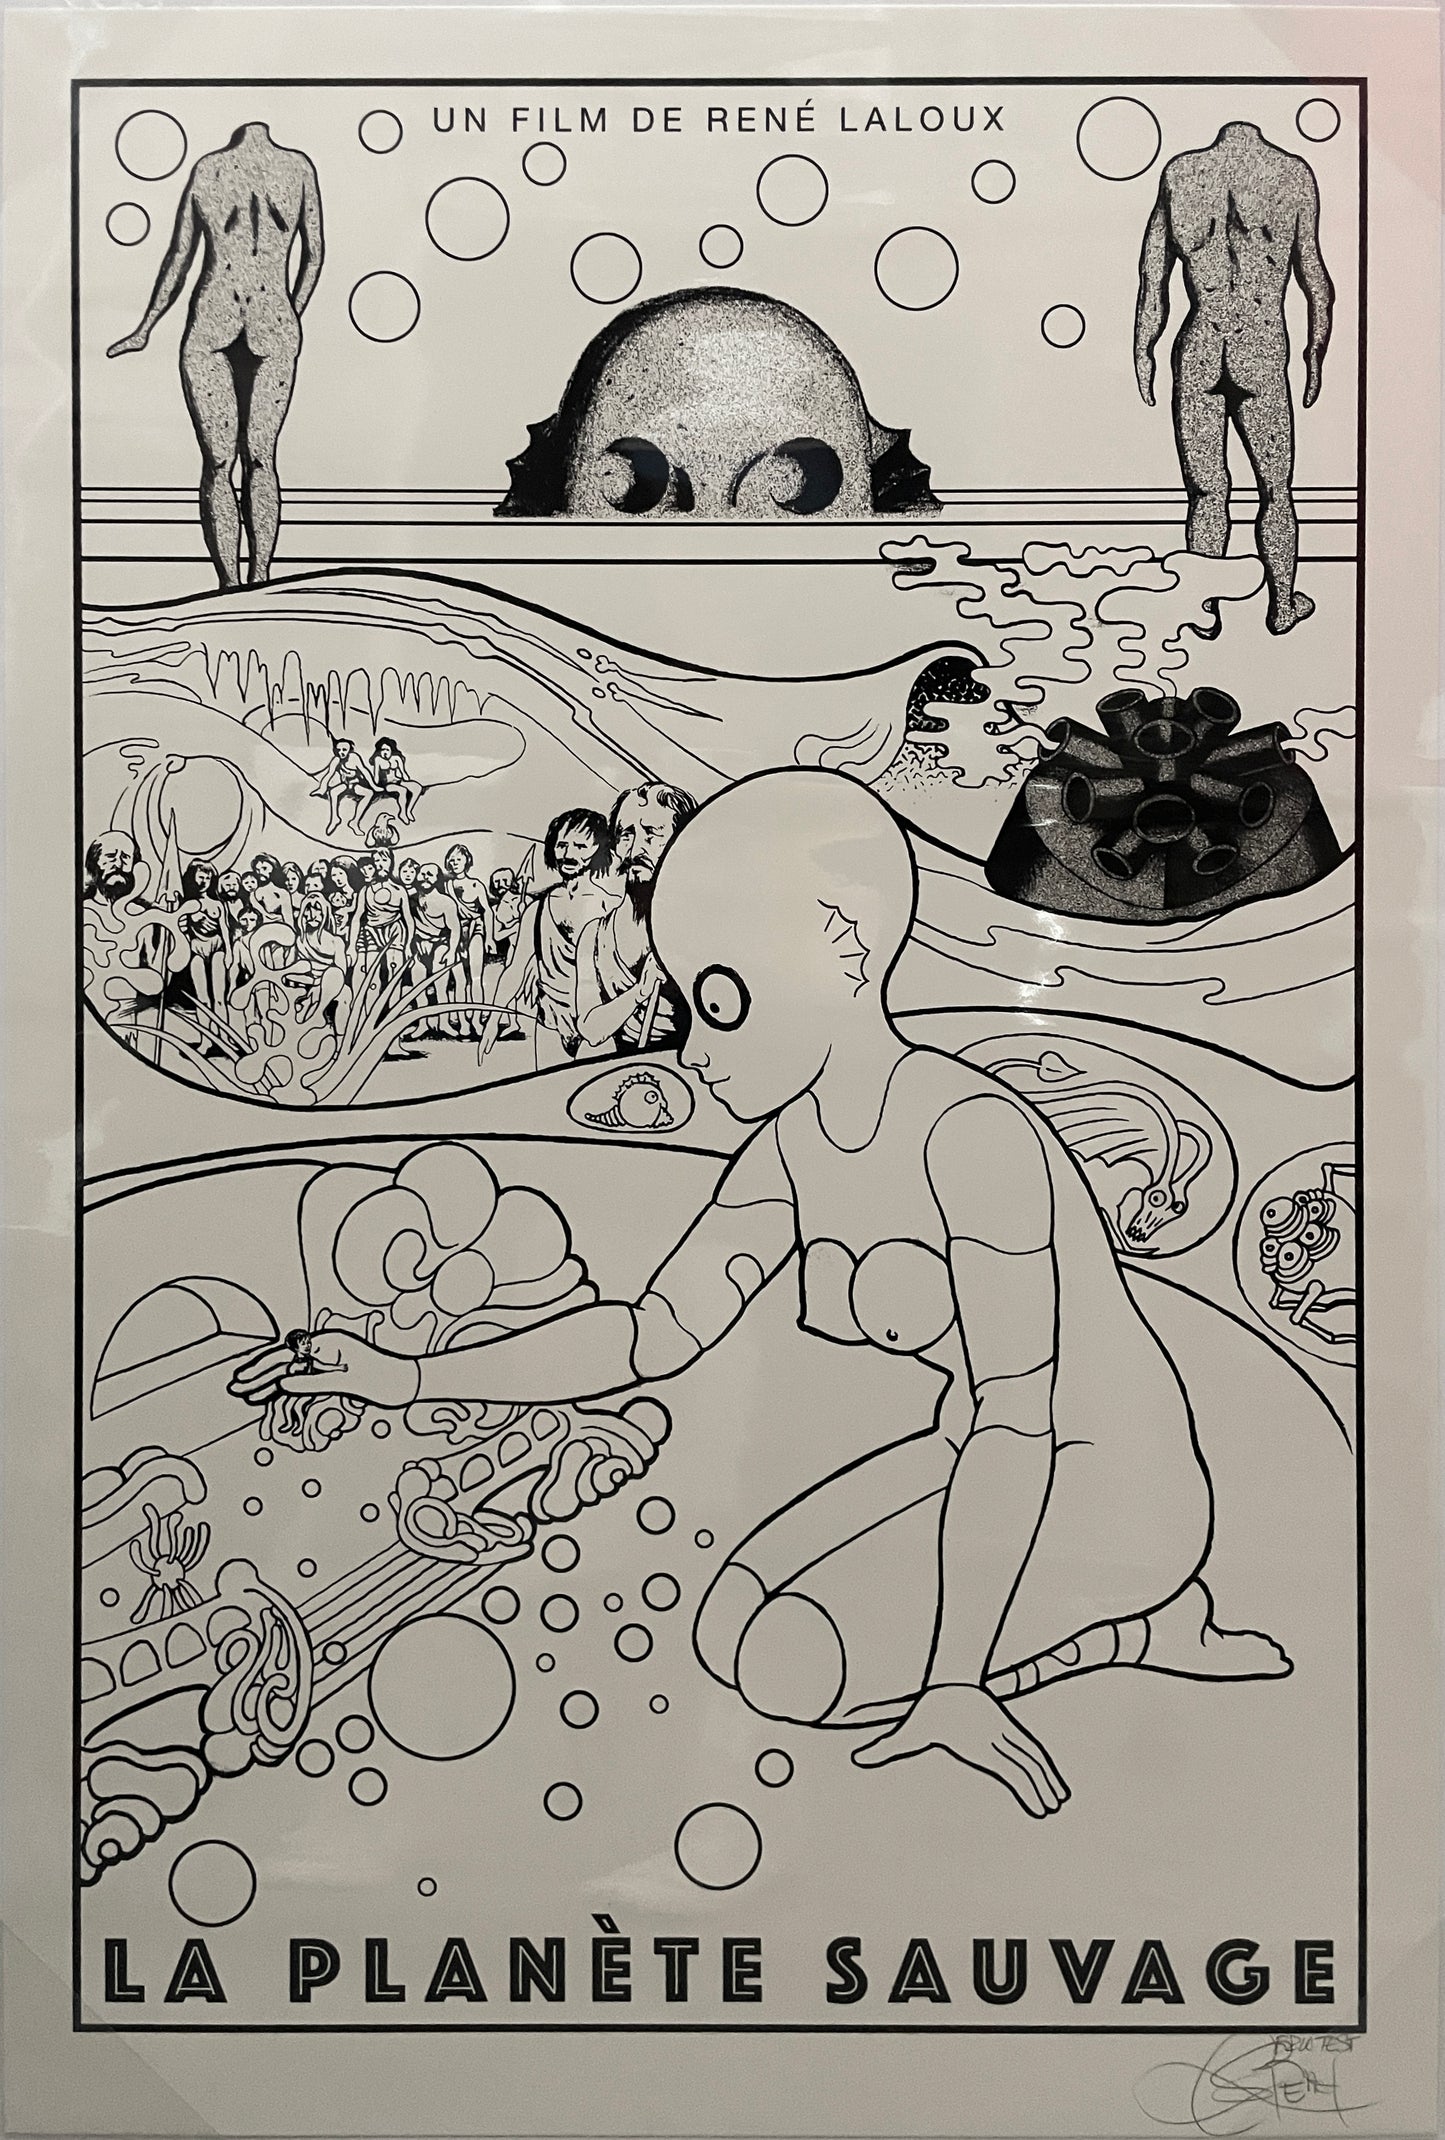  by Chuck Sperry titled Chuck Sperry - "Fantastic Planet" (B&W Test Print)